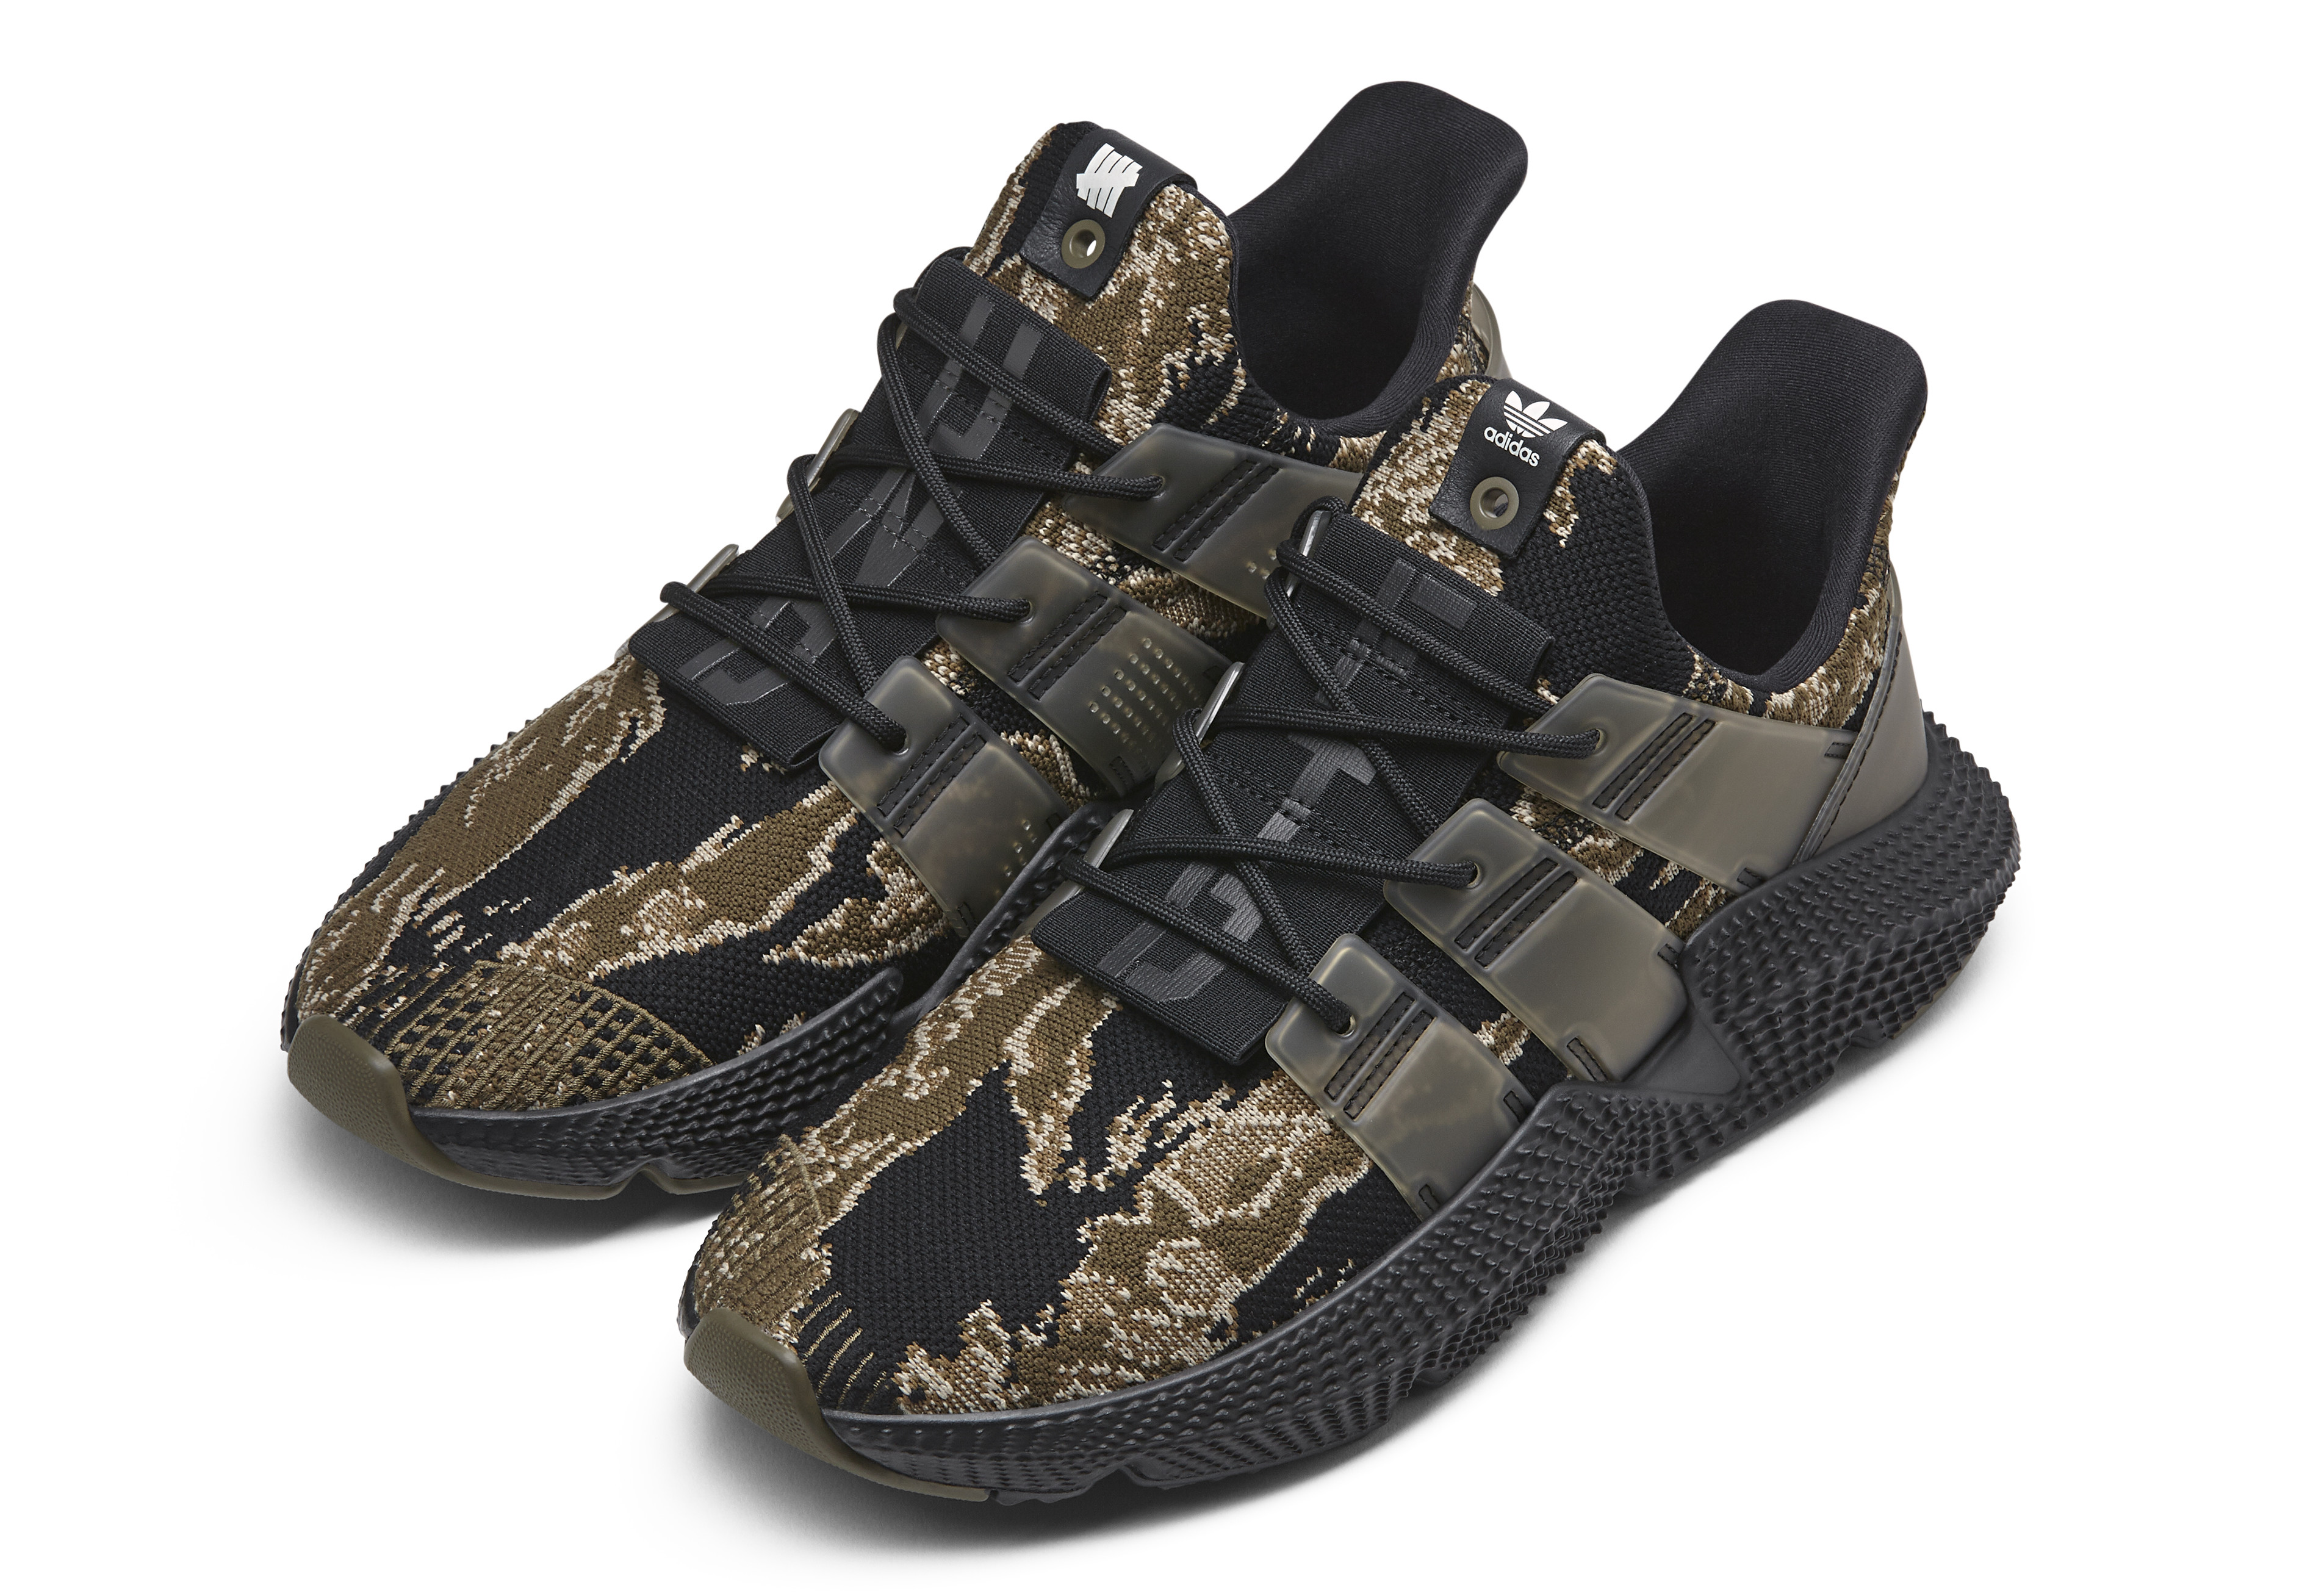 UNDFTD x Adidas Prophere Core Olive-Raw Gold AC8198 Release Date | Sole Collector